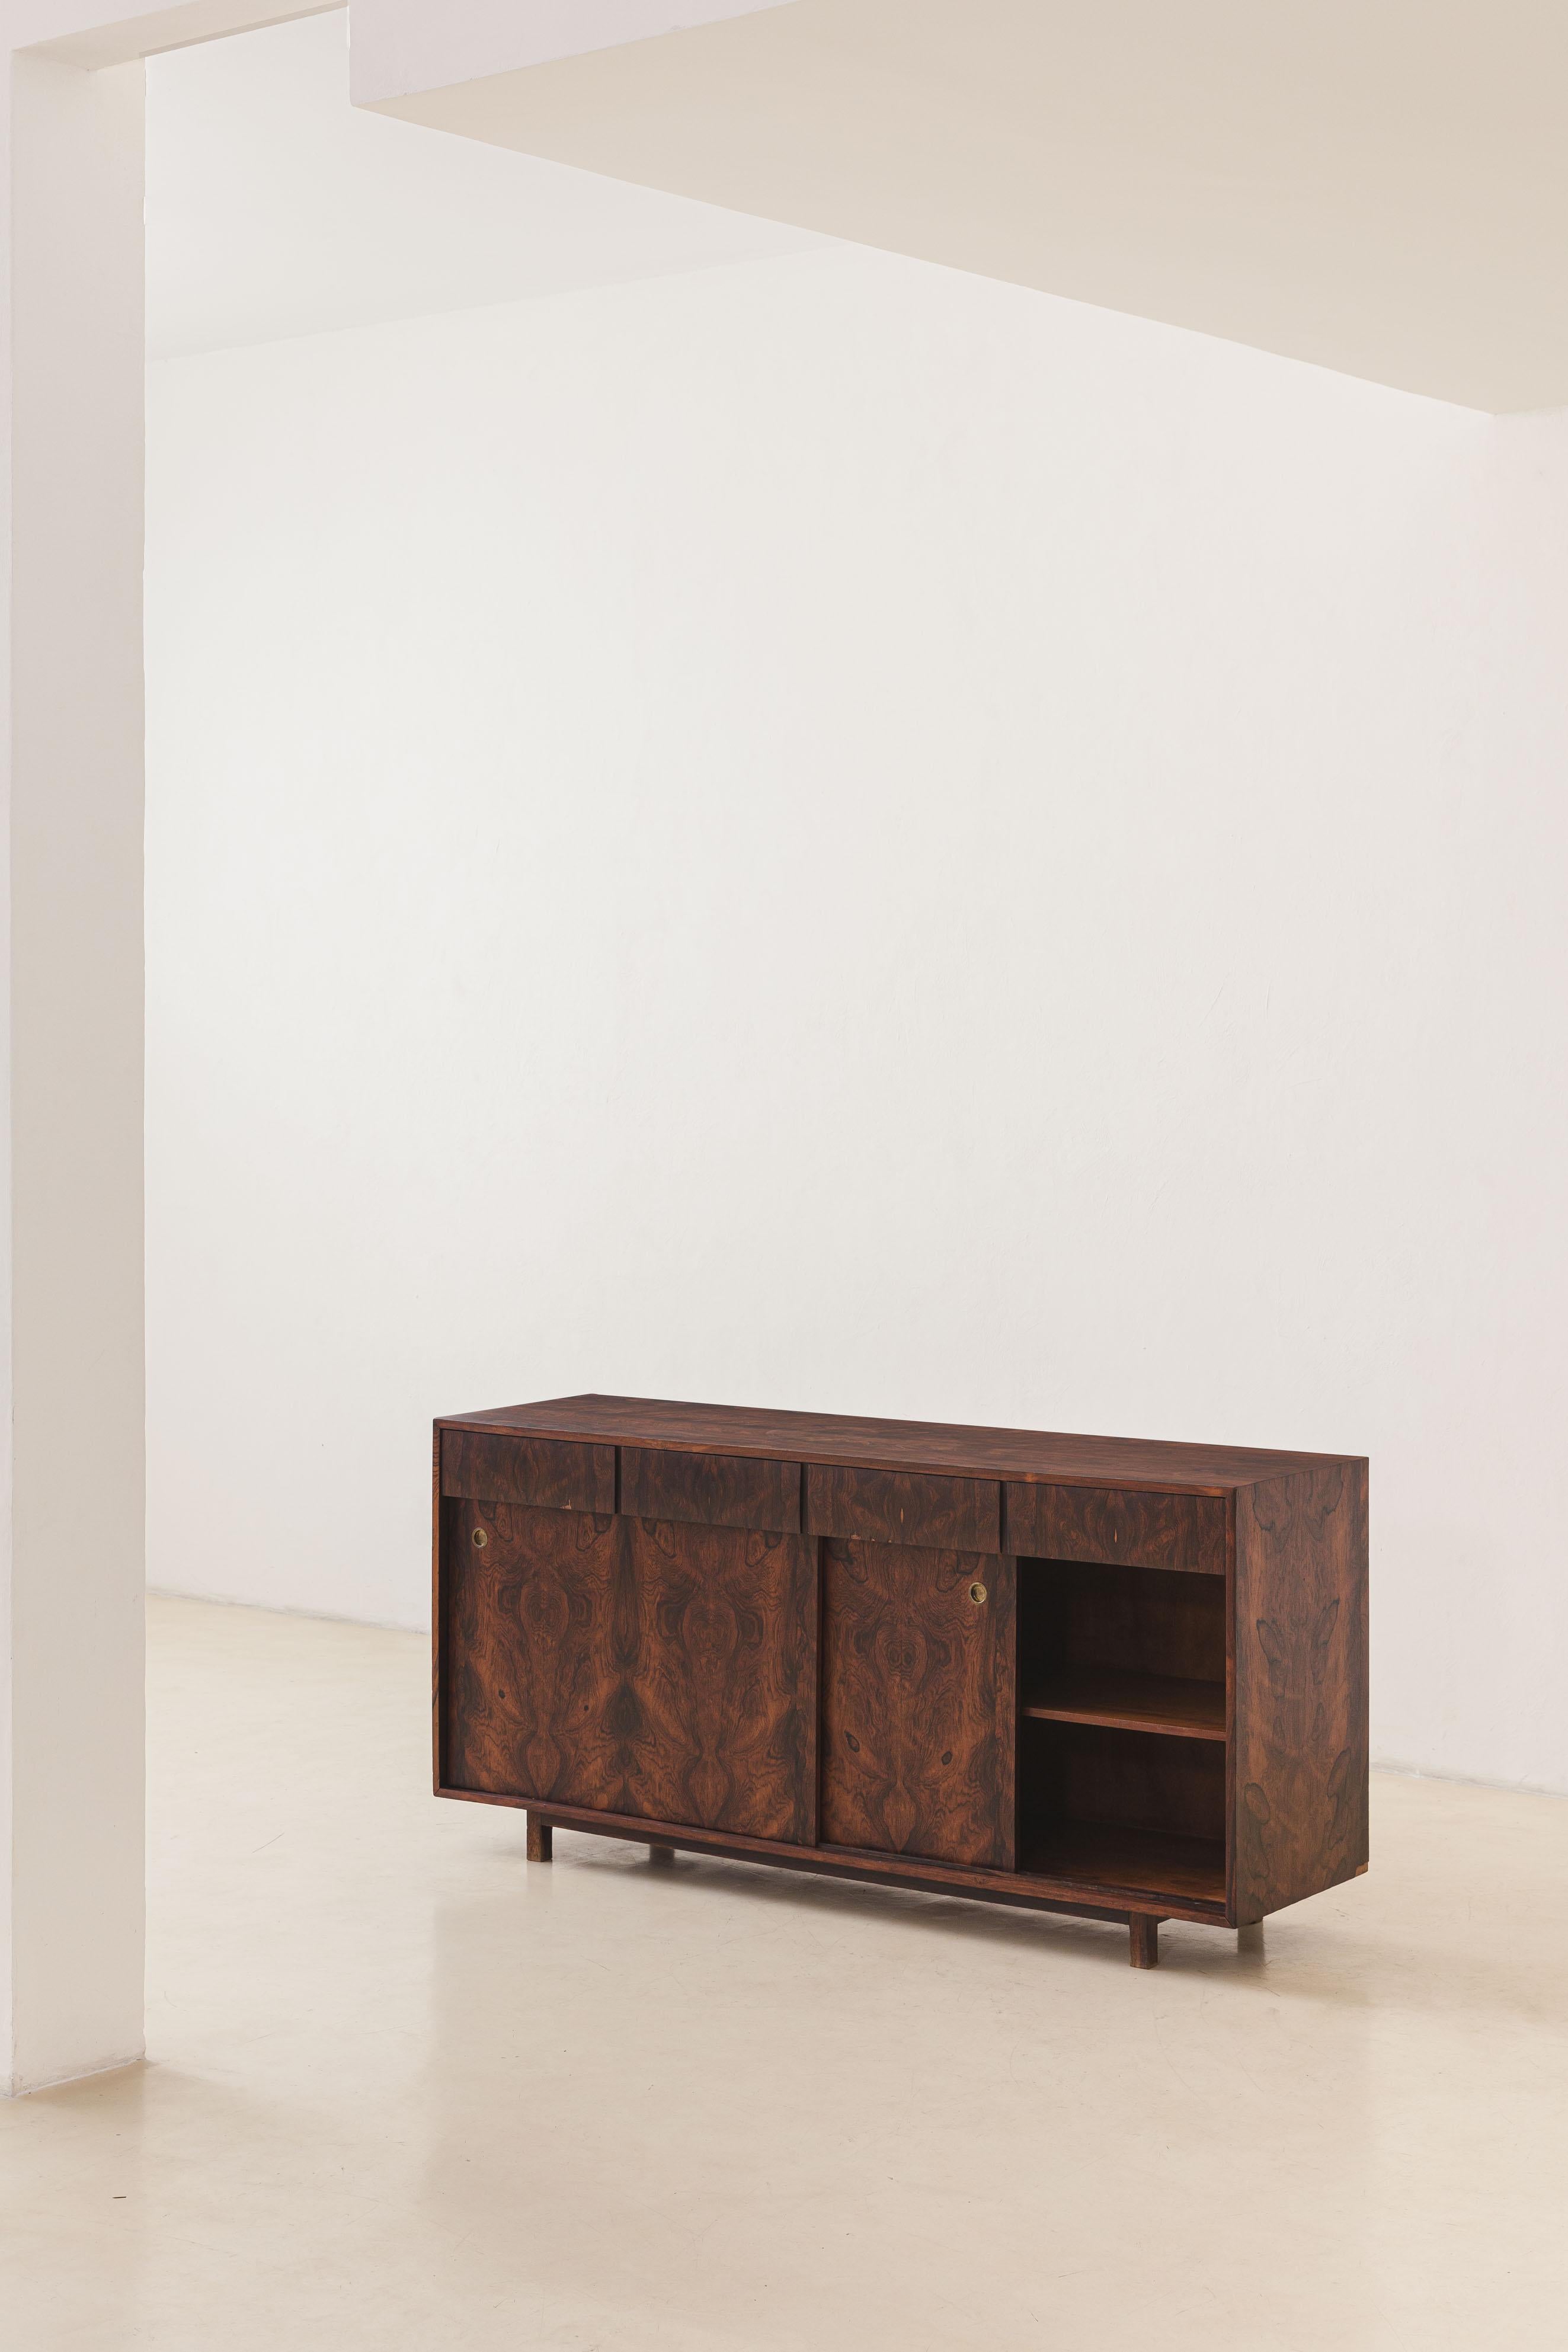 This Imbuia credenza was produced by the Brazilian company Celina Decorações in the 1960s. It consists of a very well-constructed piece composed of two large compartments with sliding doors and four drawers. This is a compact piece, ideal for more